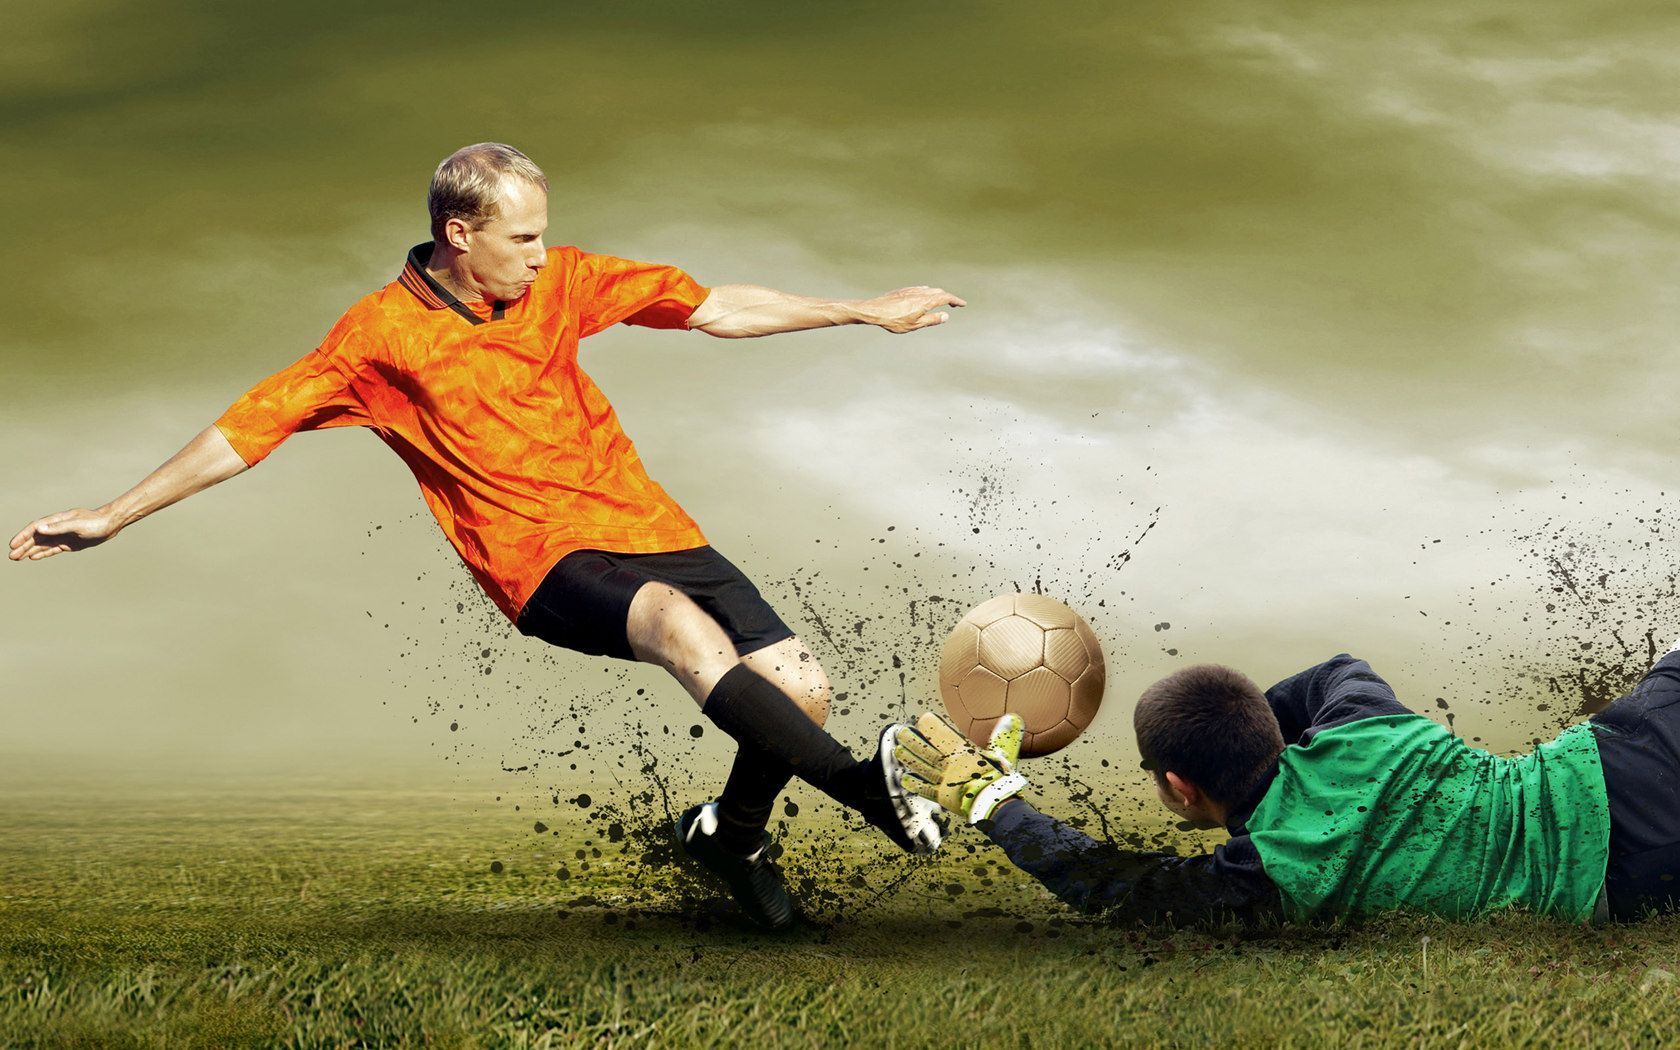 Soccer Wallpapers Archives - Football HD Wallpapers